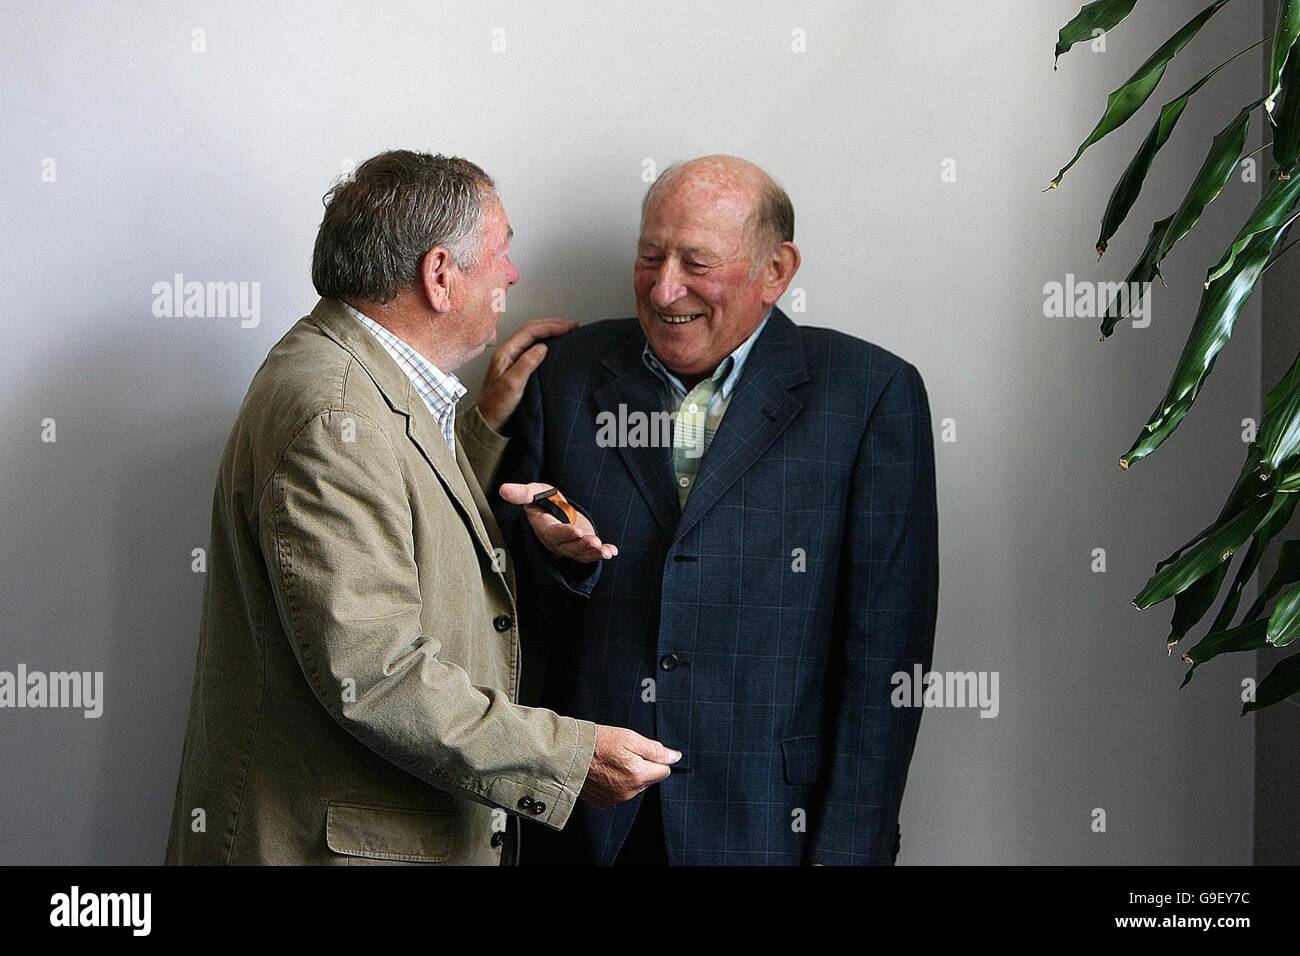 Dominick Darling and Con Clarke both of whose fathers were involved in the War of Independence, share a joke. Stock Photo